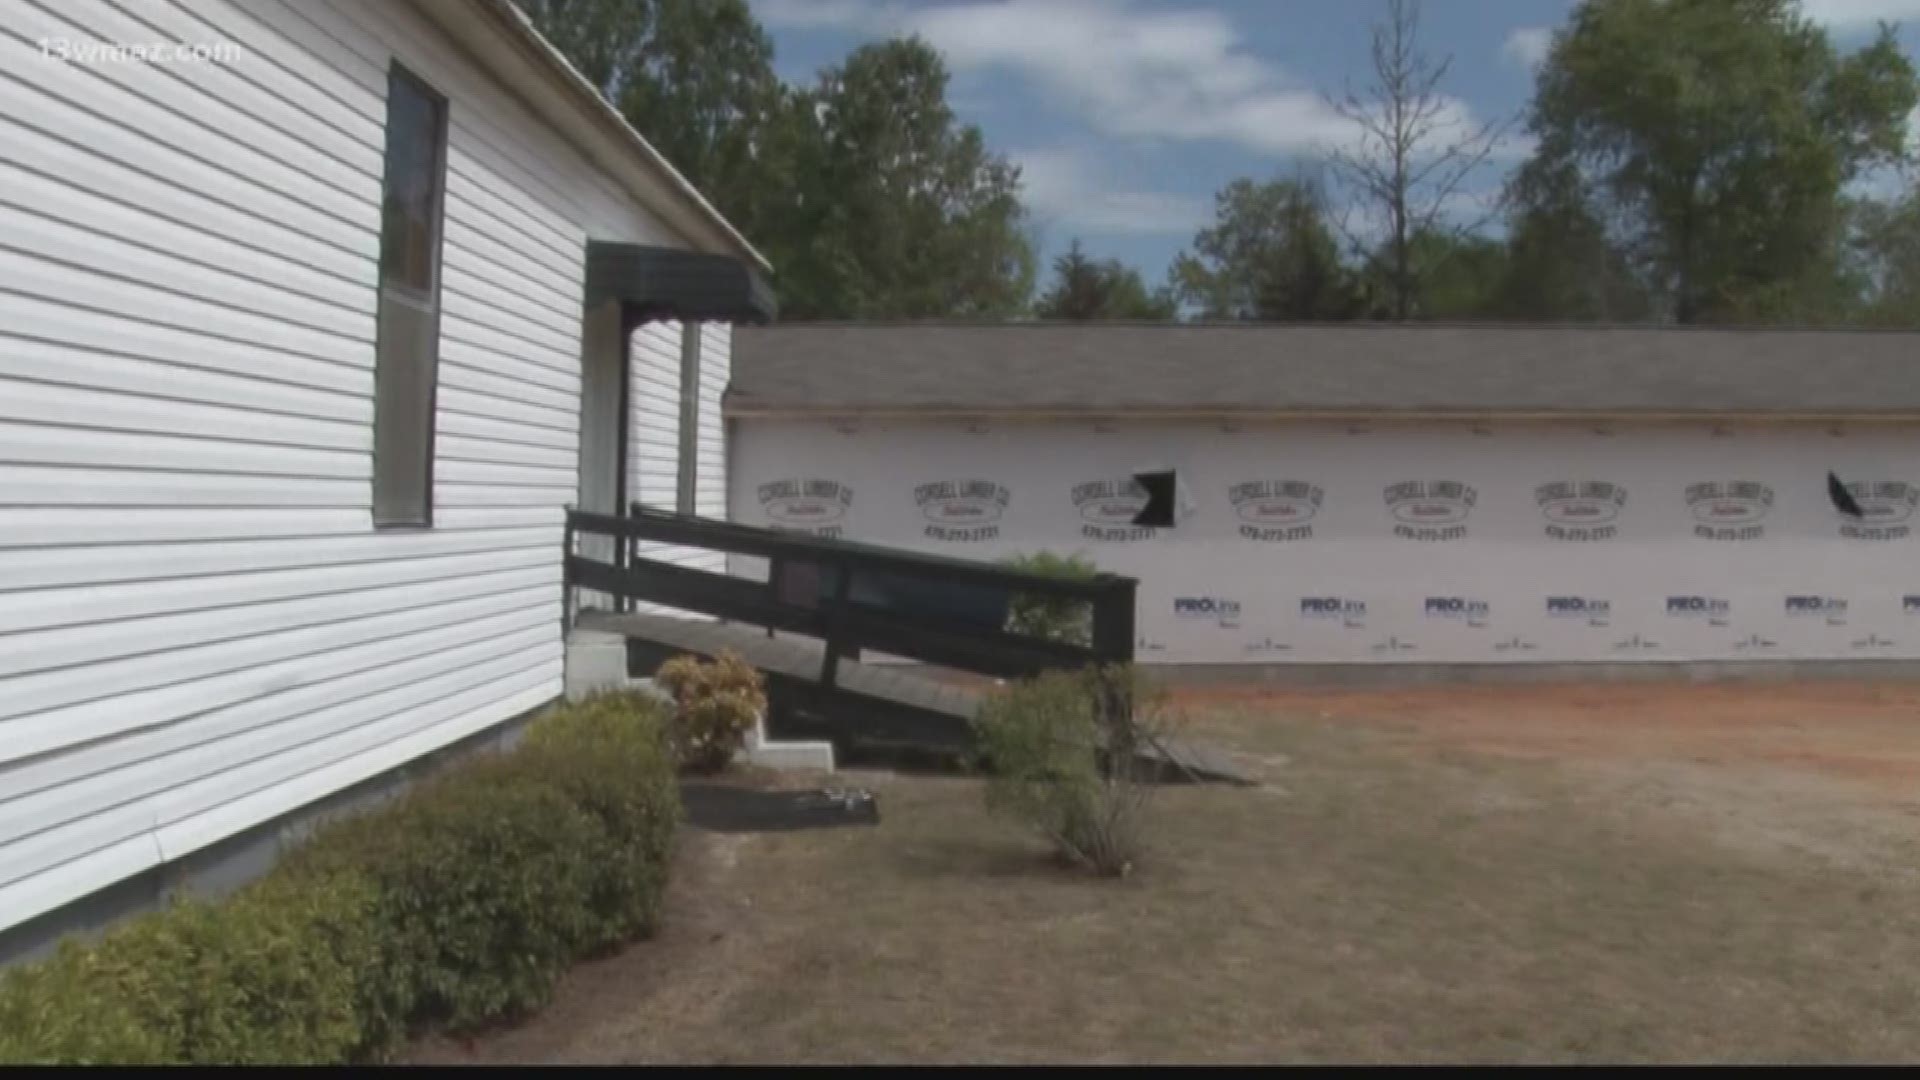 An Easter Sunday fire created a minor setback for a Cochran church last spring, but now they're making a major comeback.